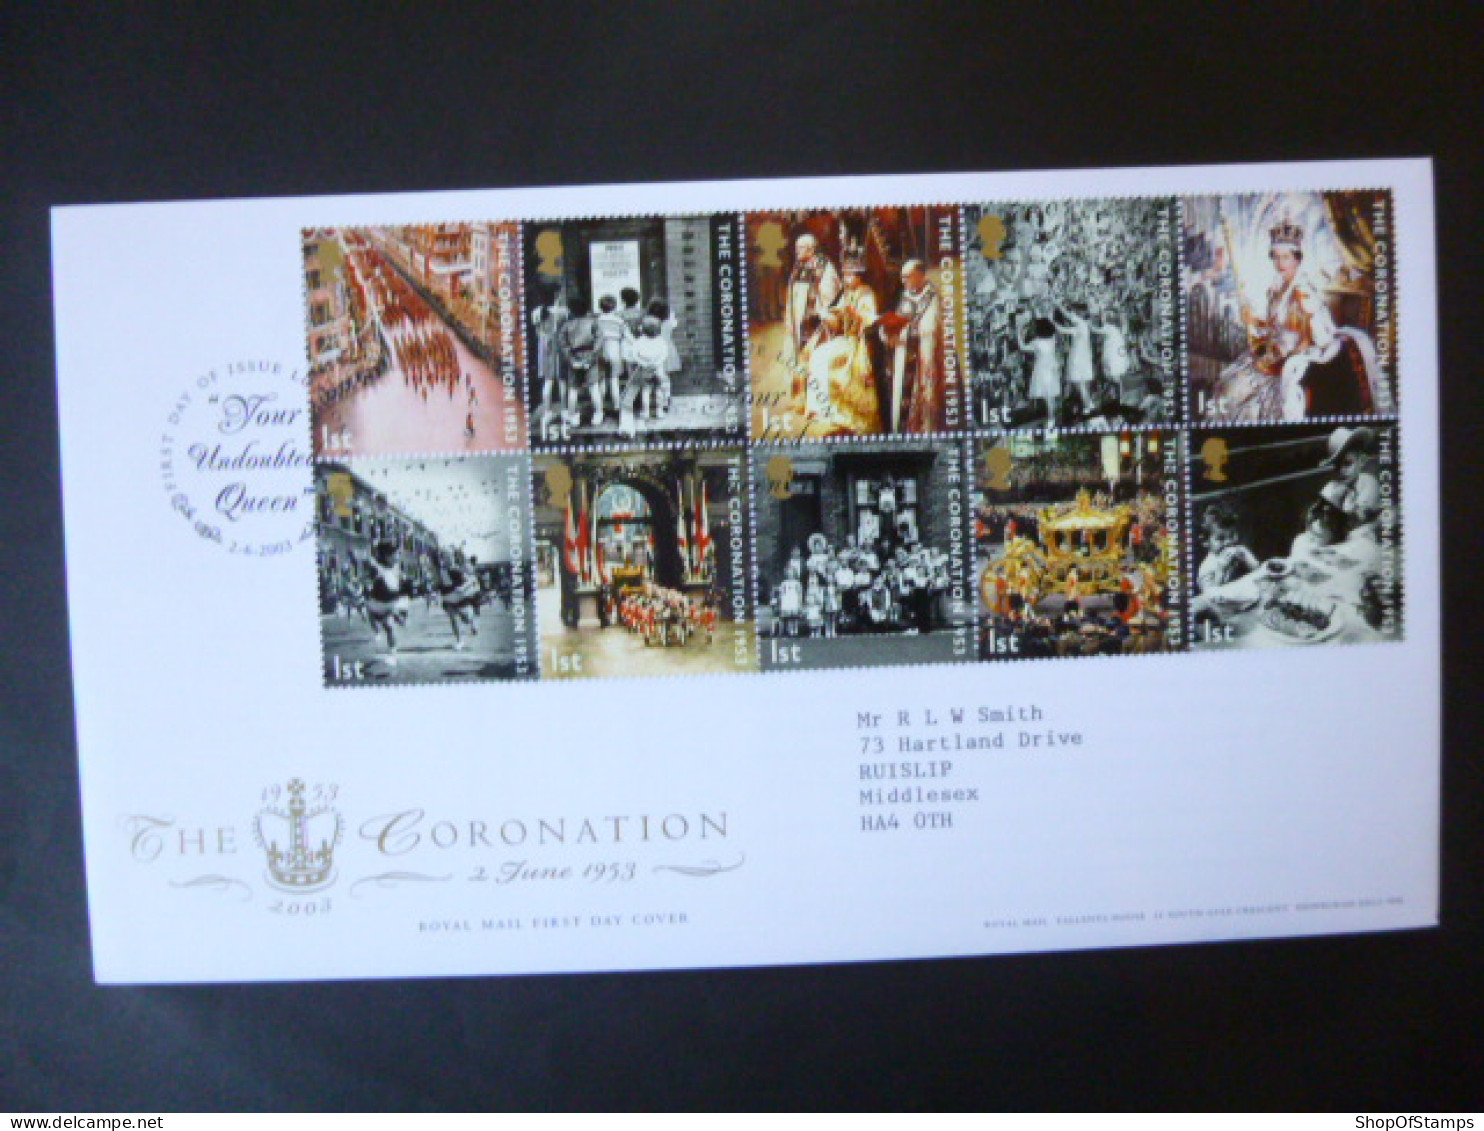 GREAT BRITAIN SG 2368-77 50TH ANNIVERSARY OF CORONATION FDC LONDON - Unclassified